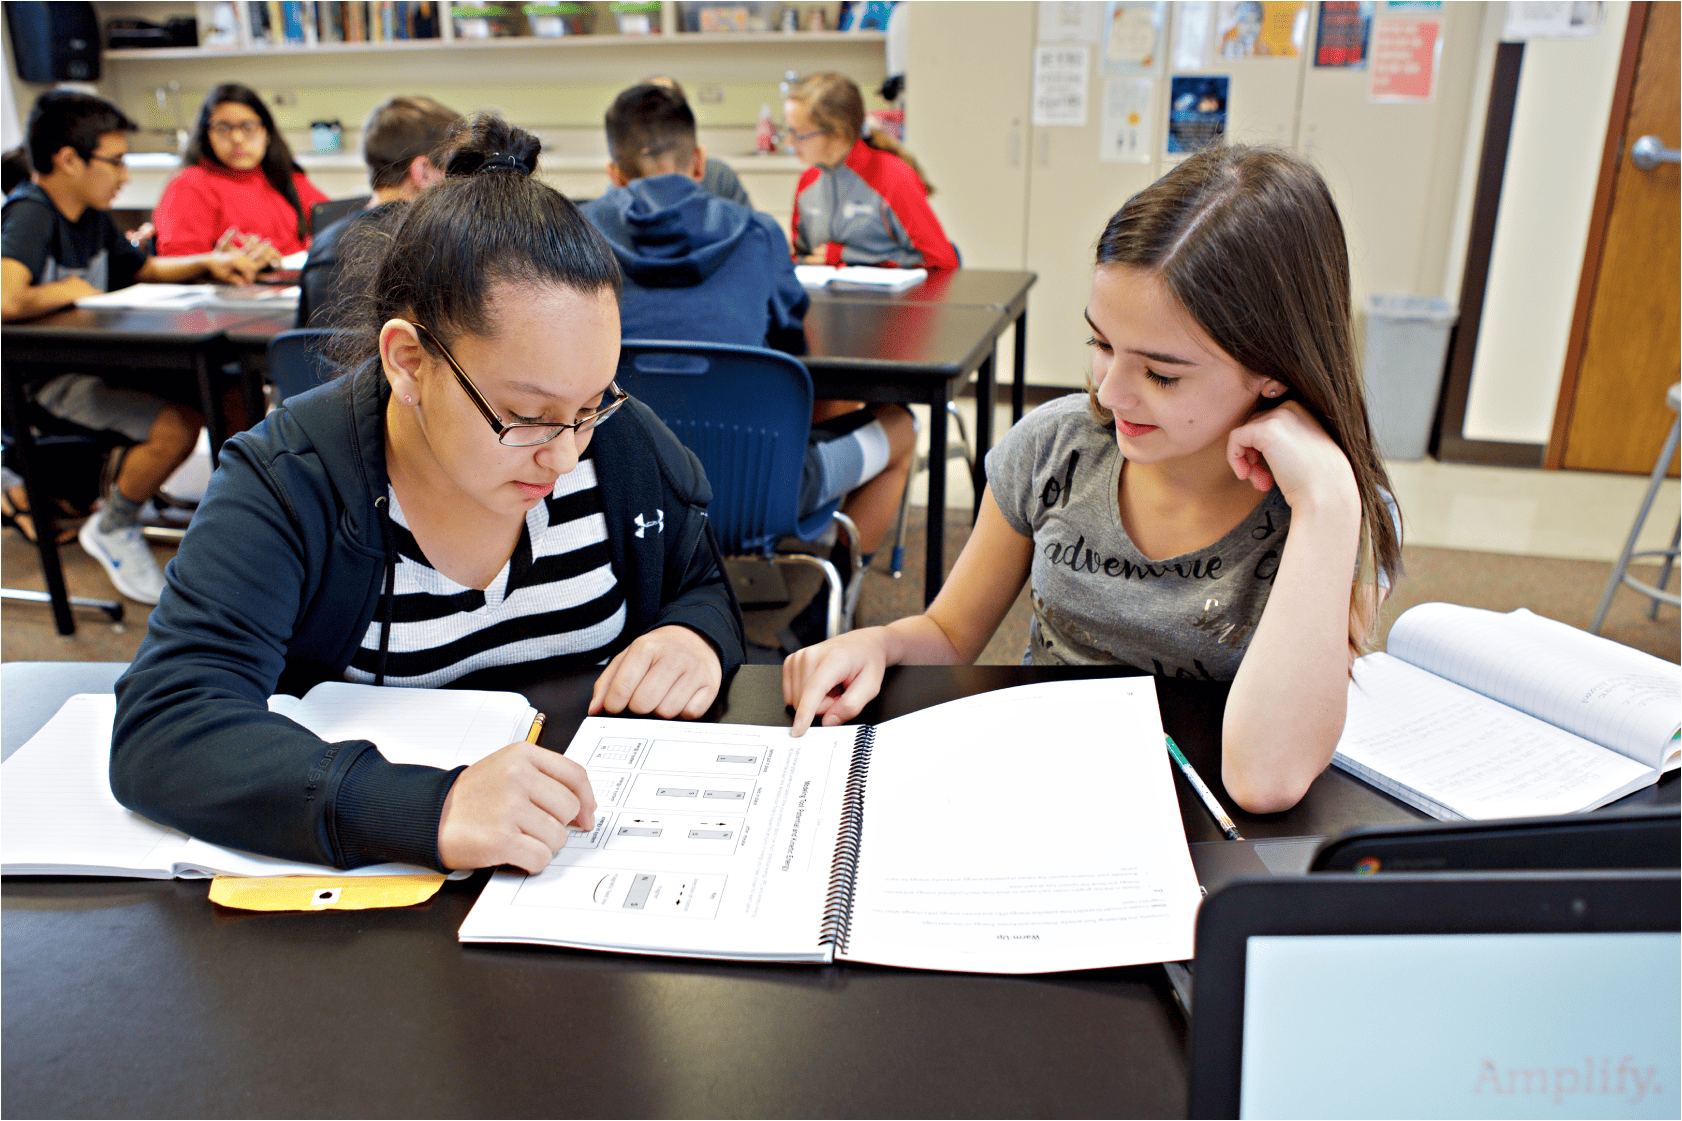 Two middle school girls use a Student Investigation Notebook to take on the role of scientists and engineers